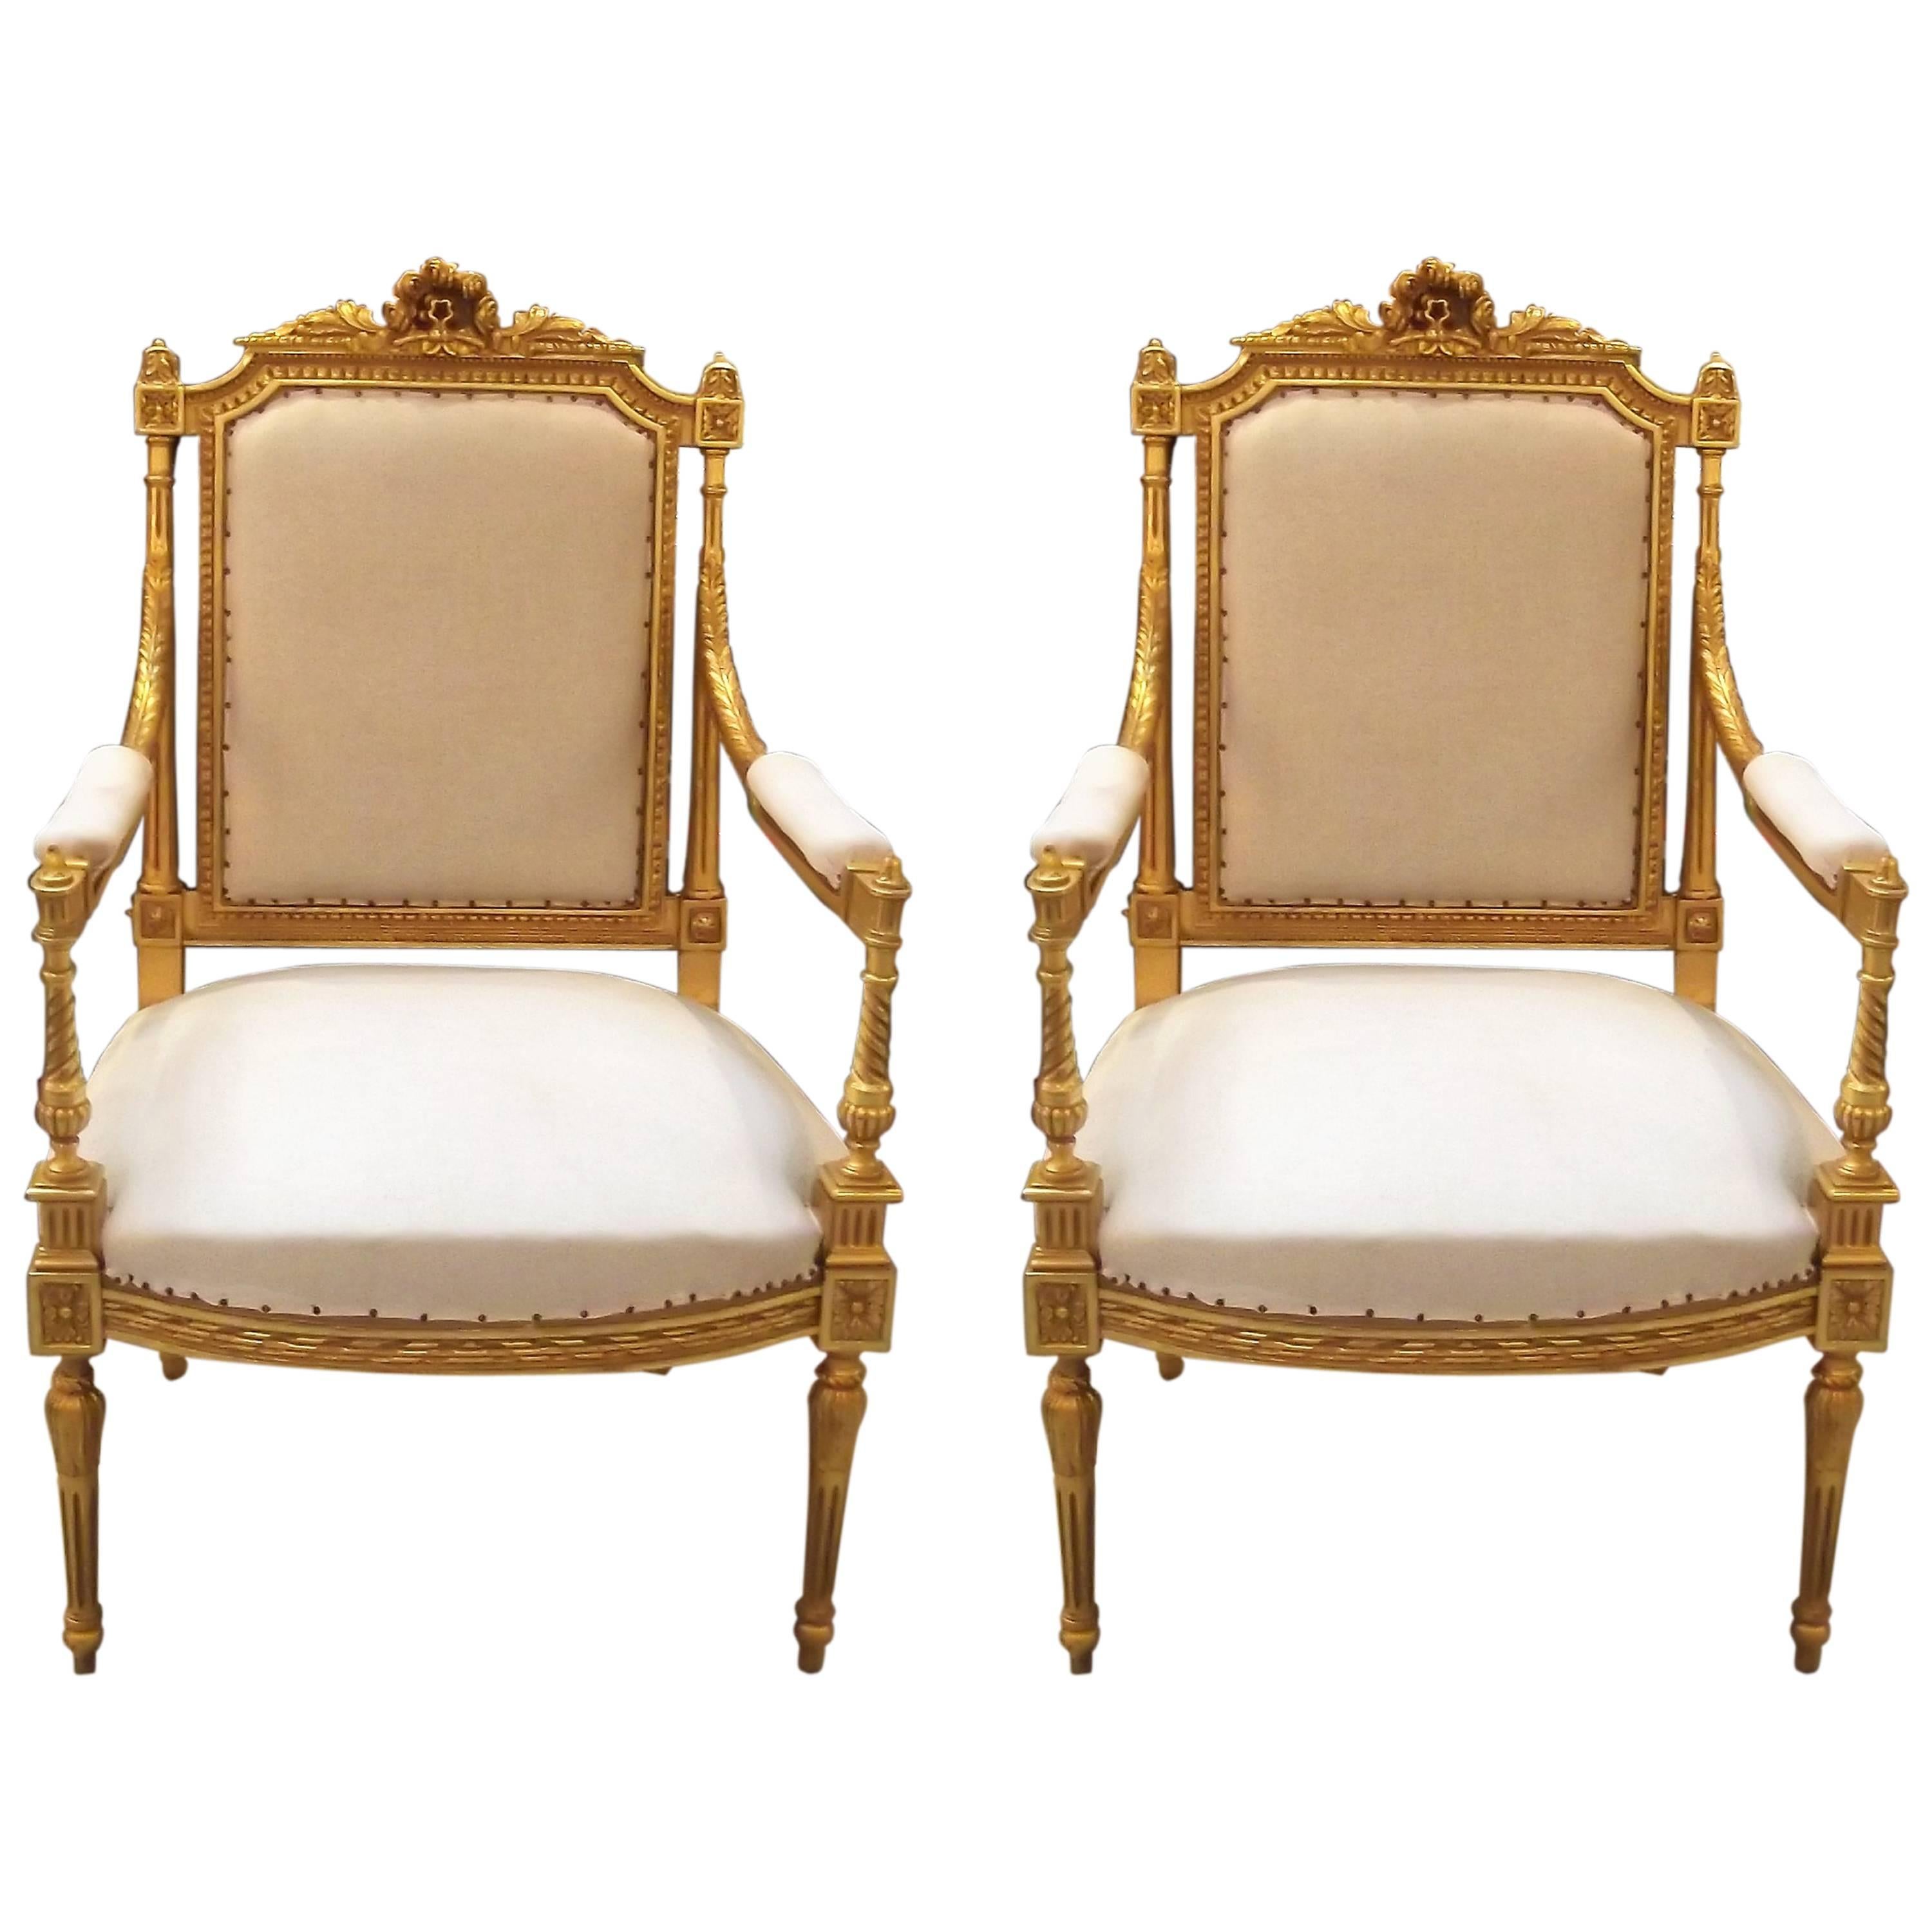 Pair of Louis XVI Style Giltwood Chairs